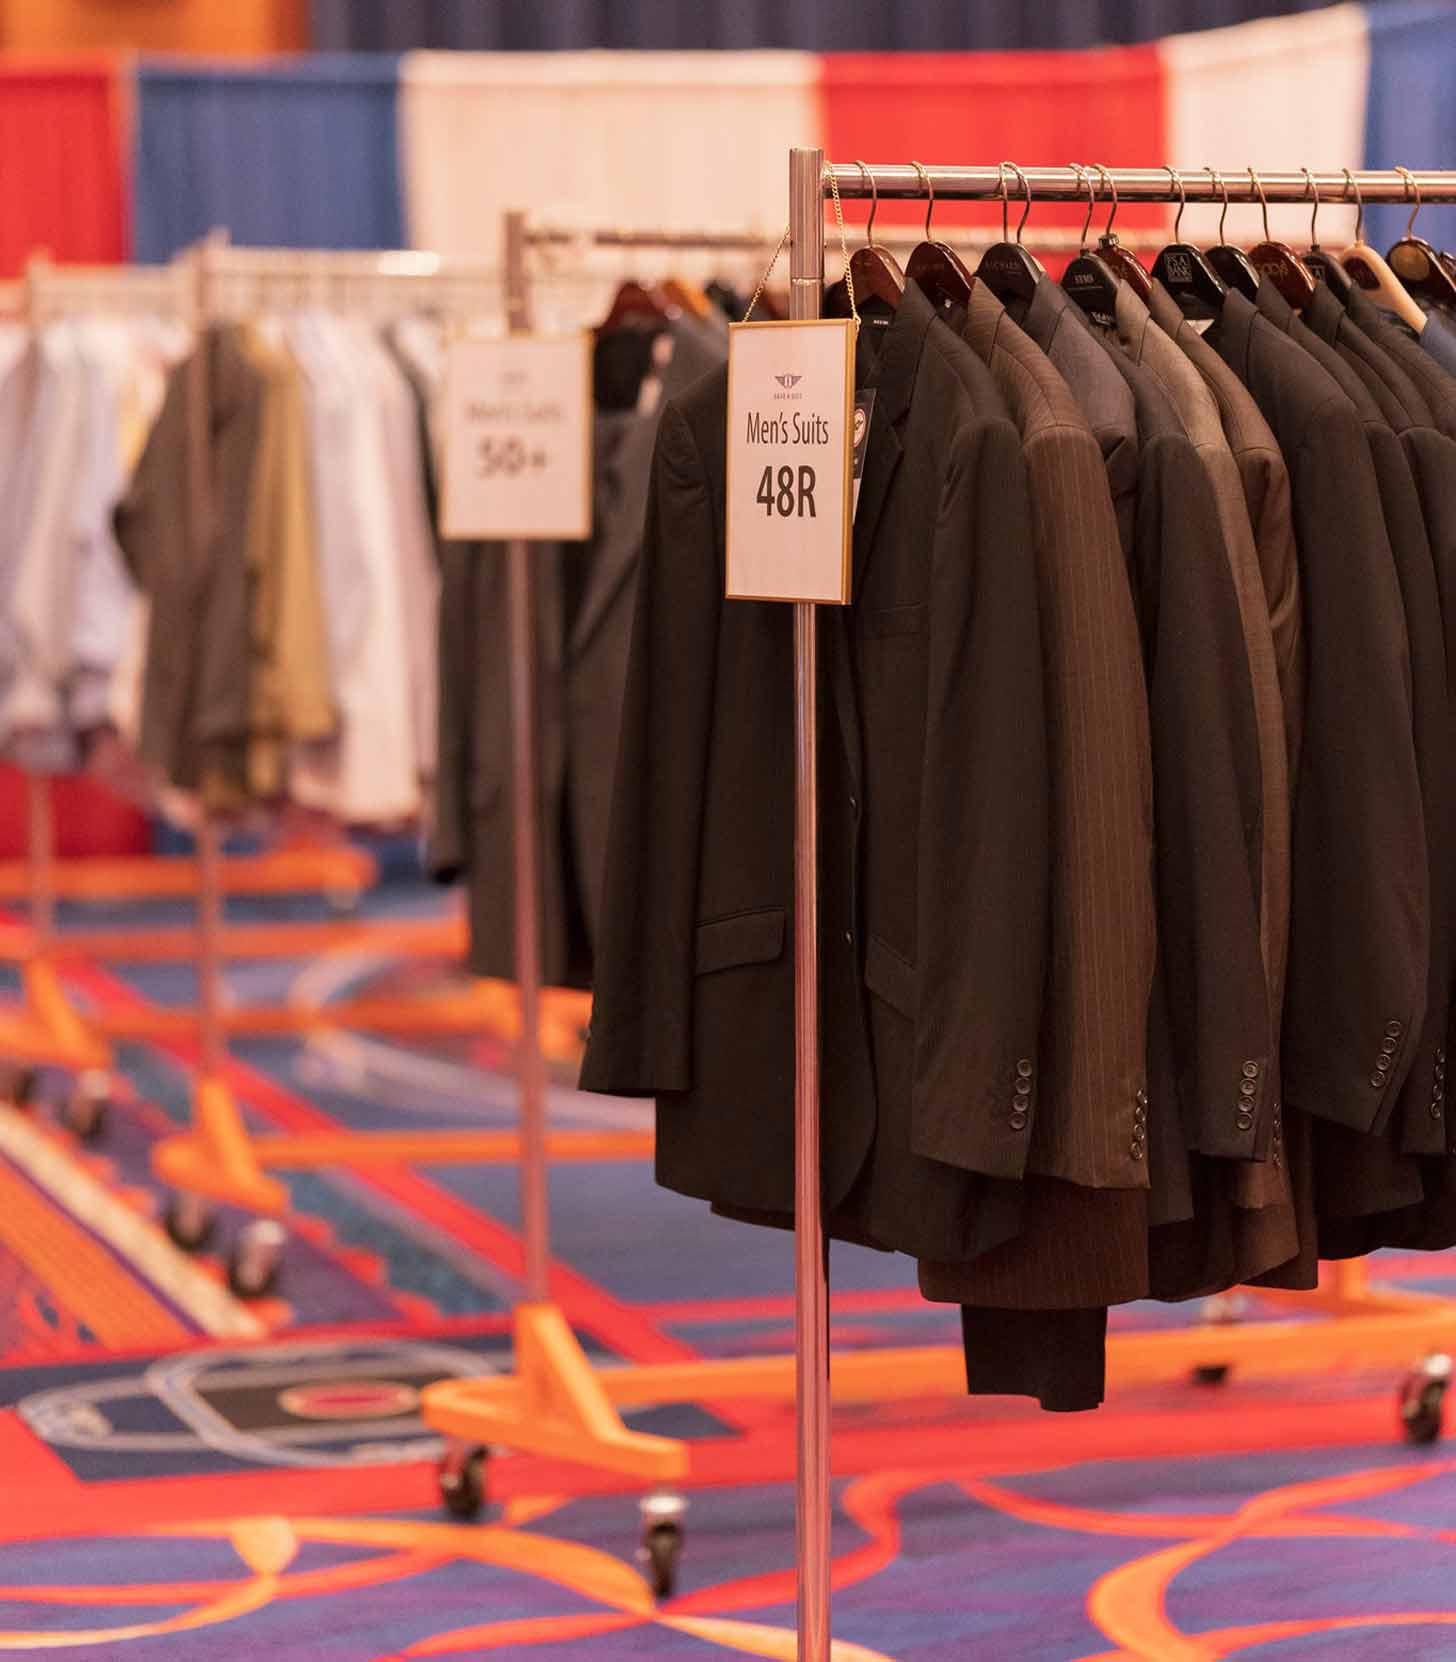 Rack of Men's Suits at a suiting event for Save a Suit